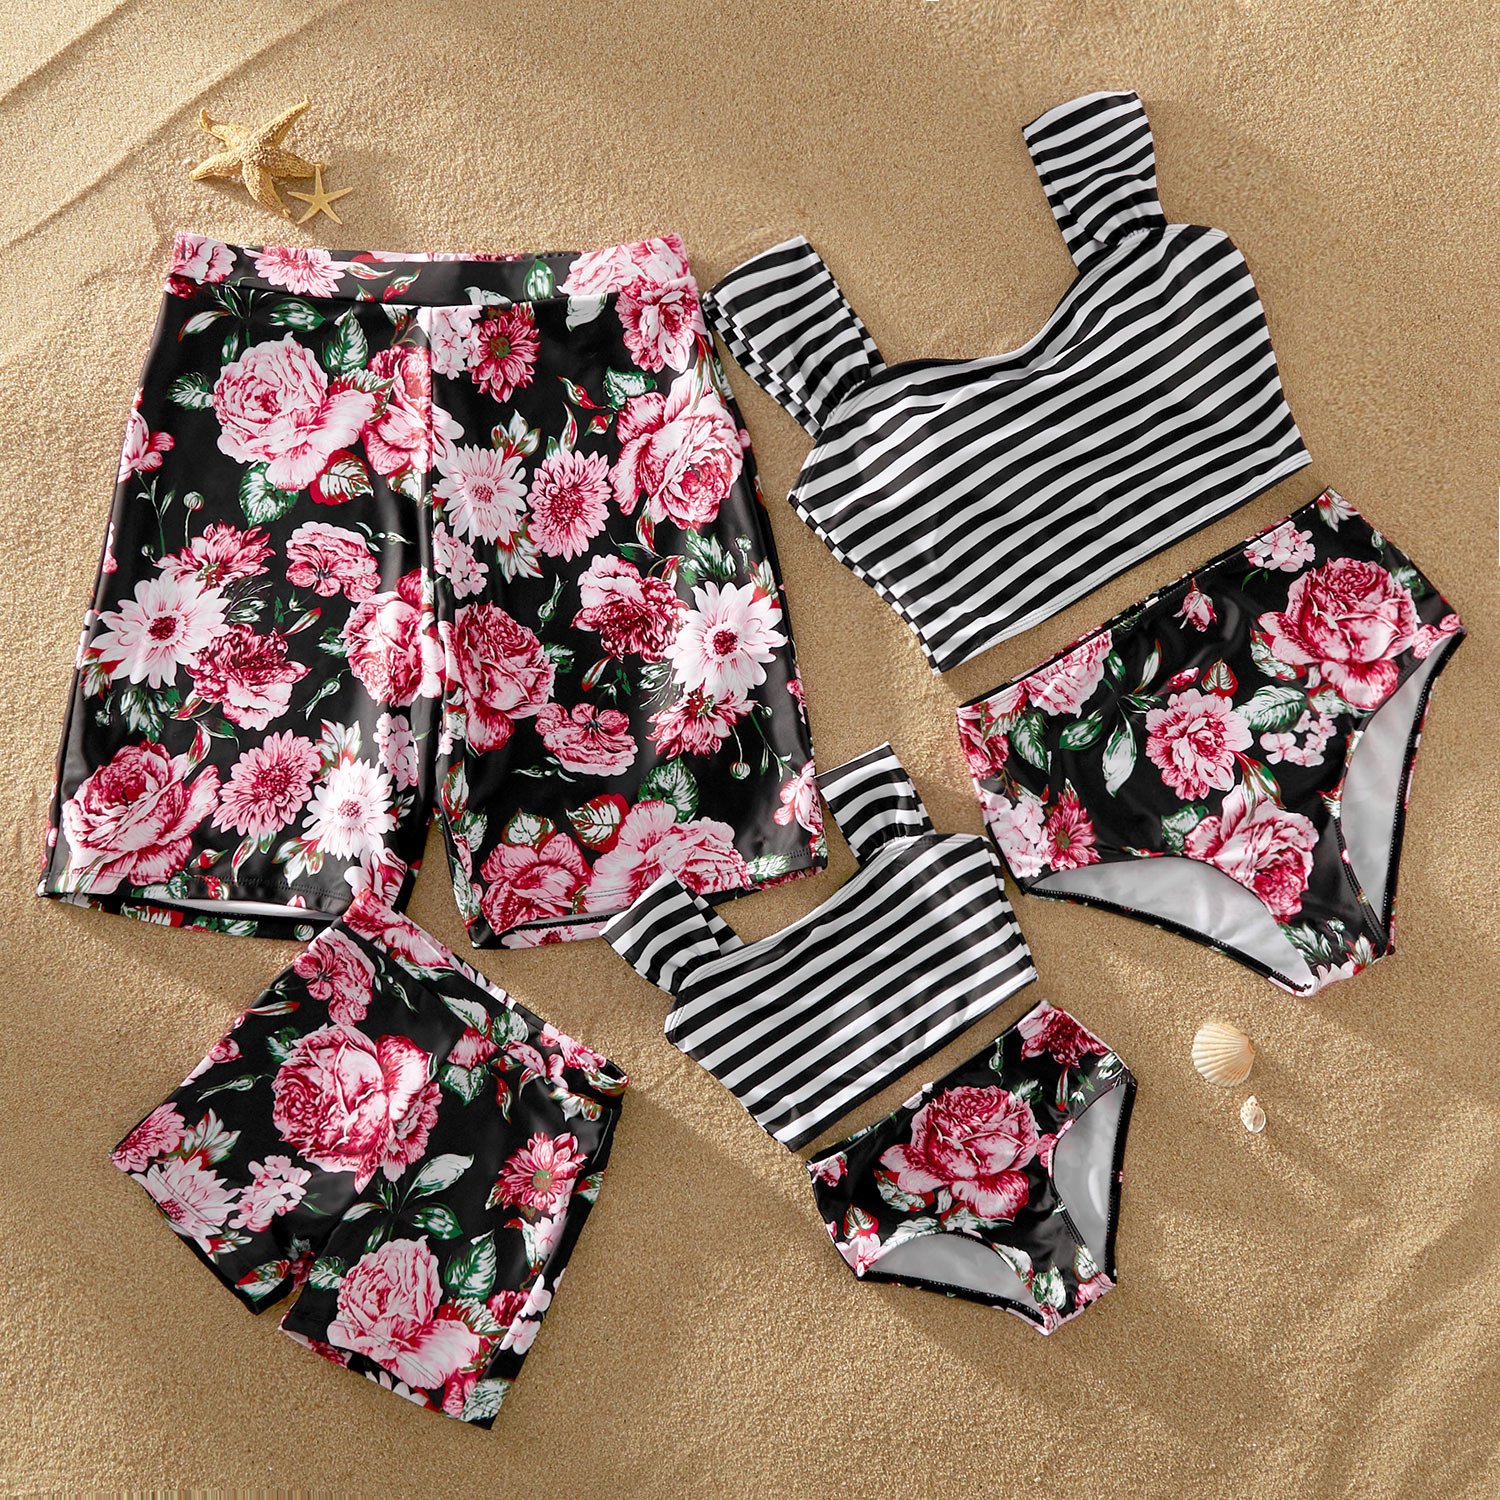 Striped and Floral Print Matching Swimsuits